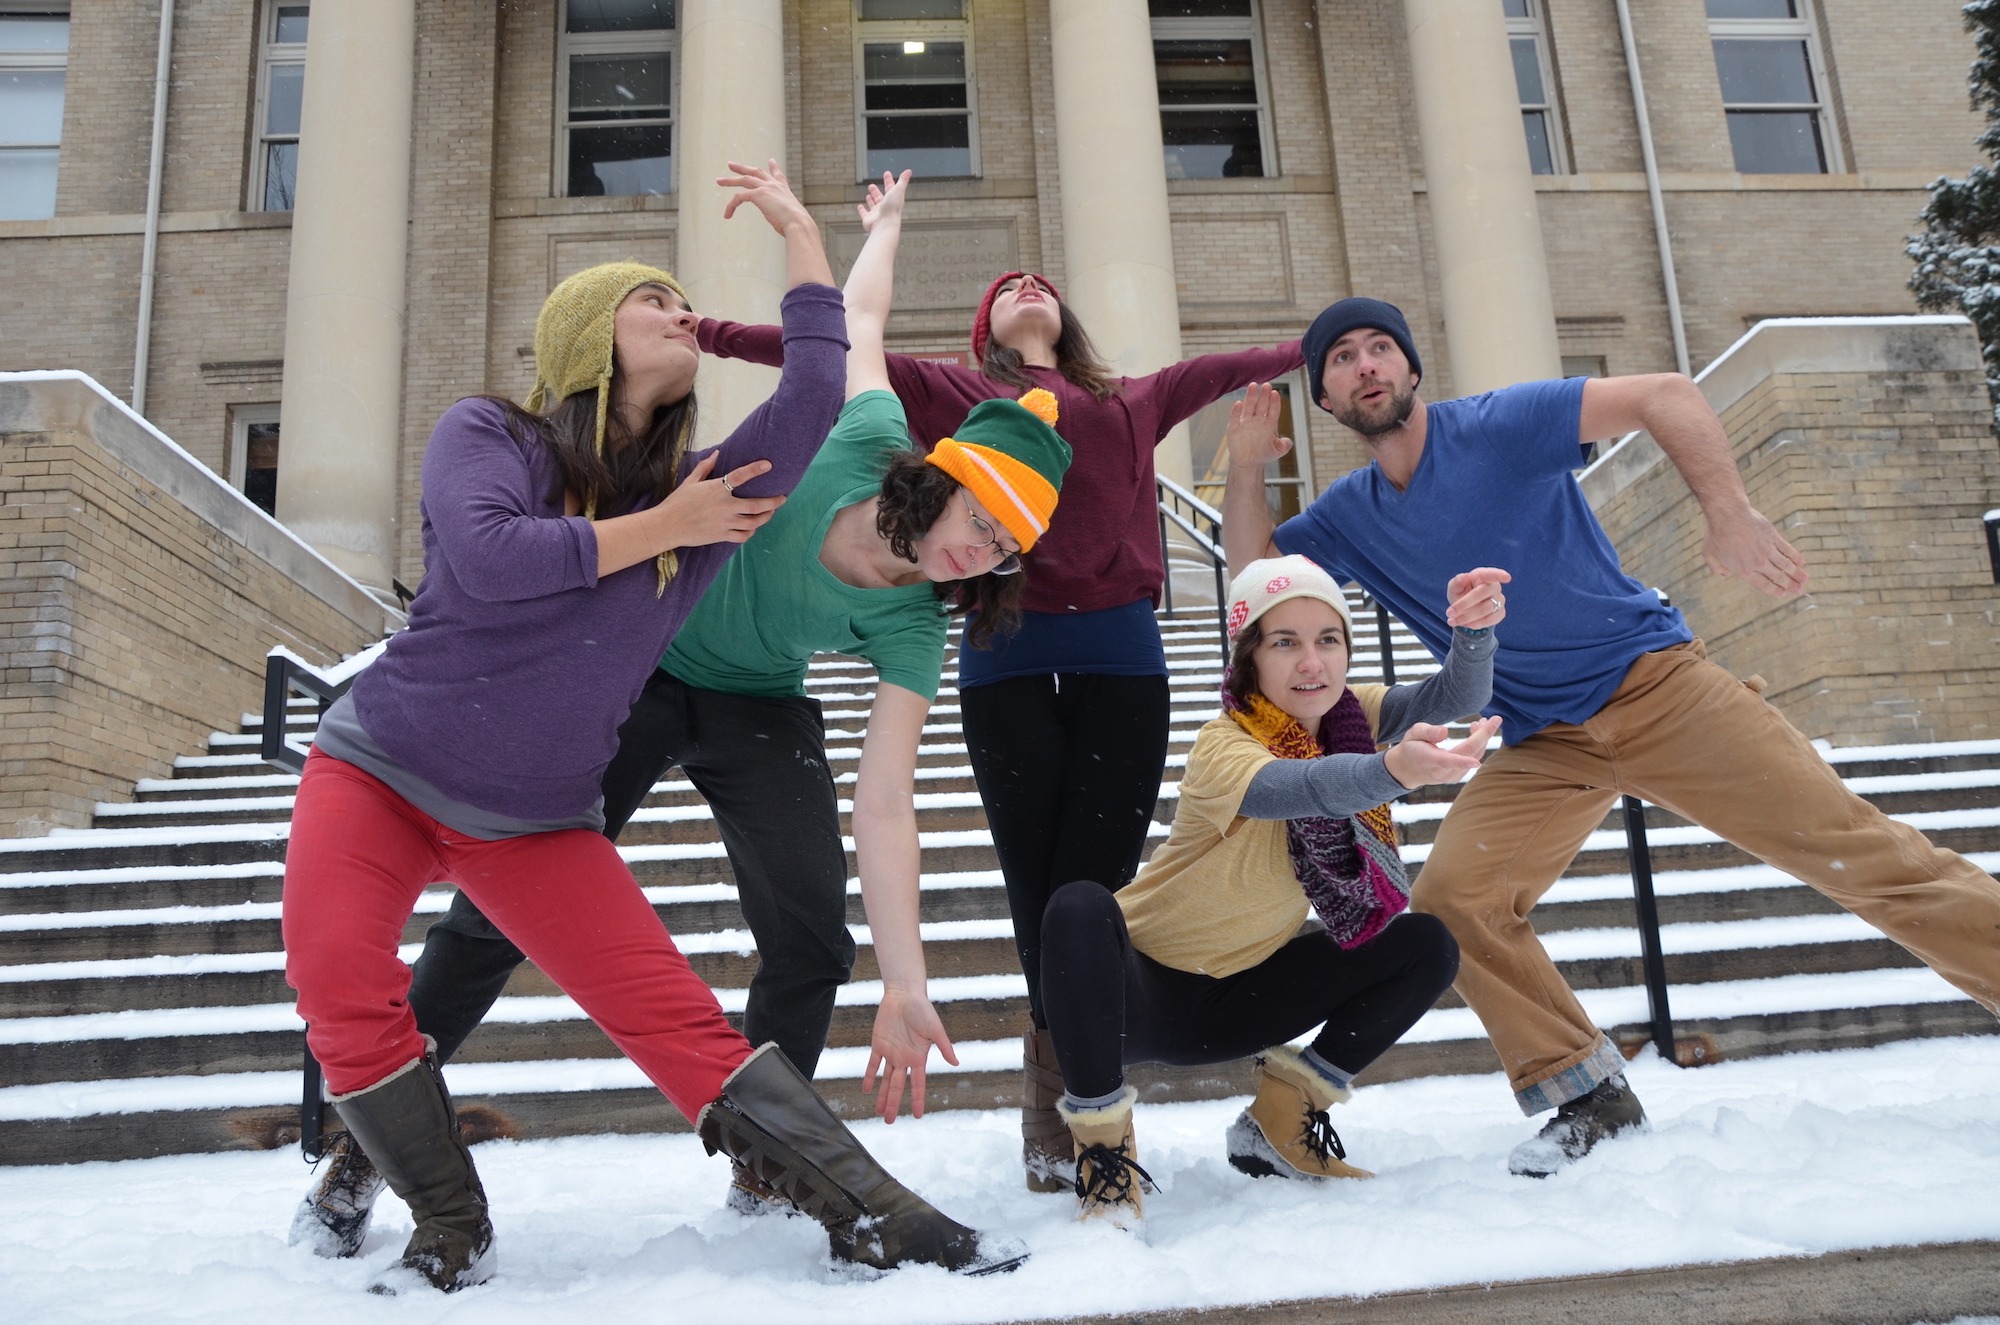 CU Contemporary Dance Works students practicing for their tour in Paonia. Photo by Ellen Reynerson